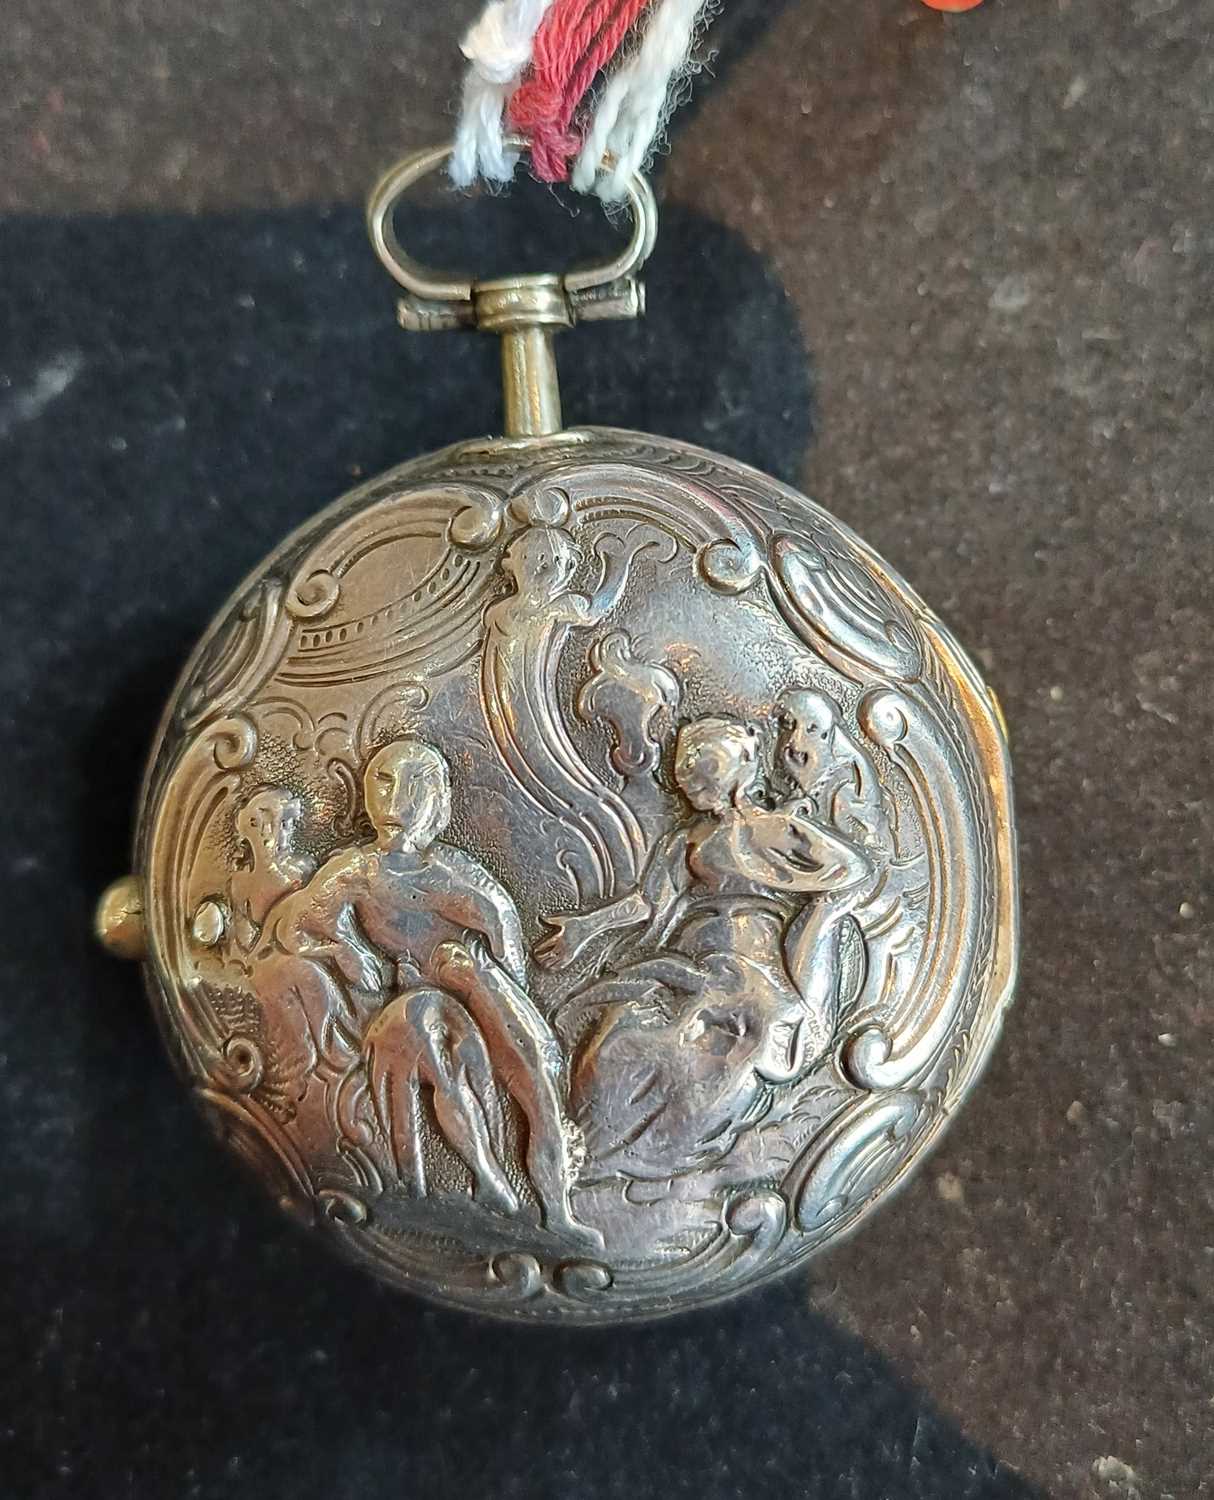 A Silver Pair Cased Repousse Verge Pocket Watch, signed Samson, London, 1781, single chain fusee - Image 3 of 5